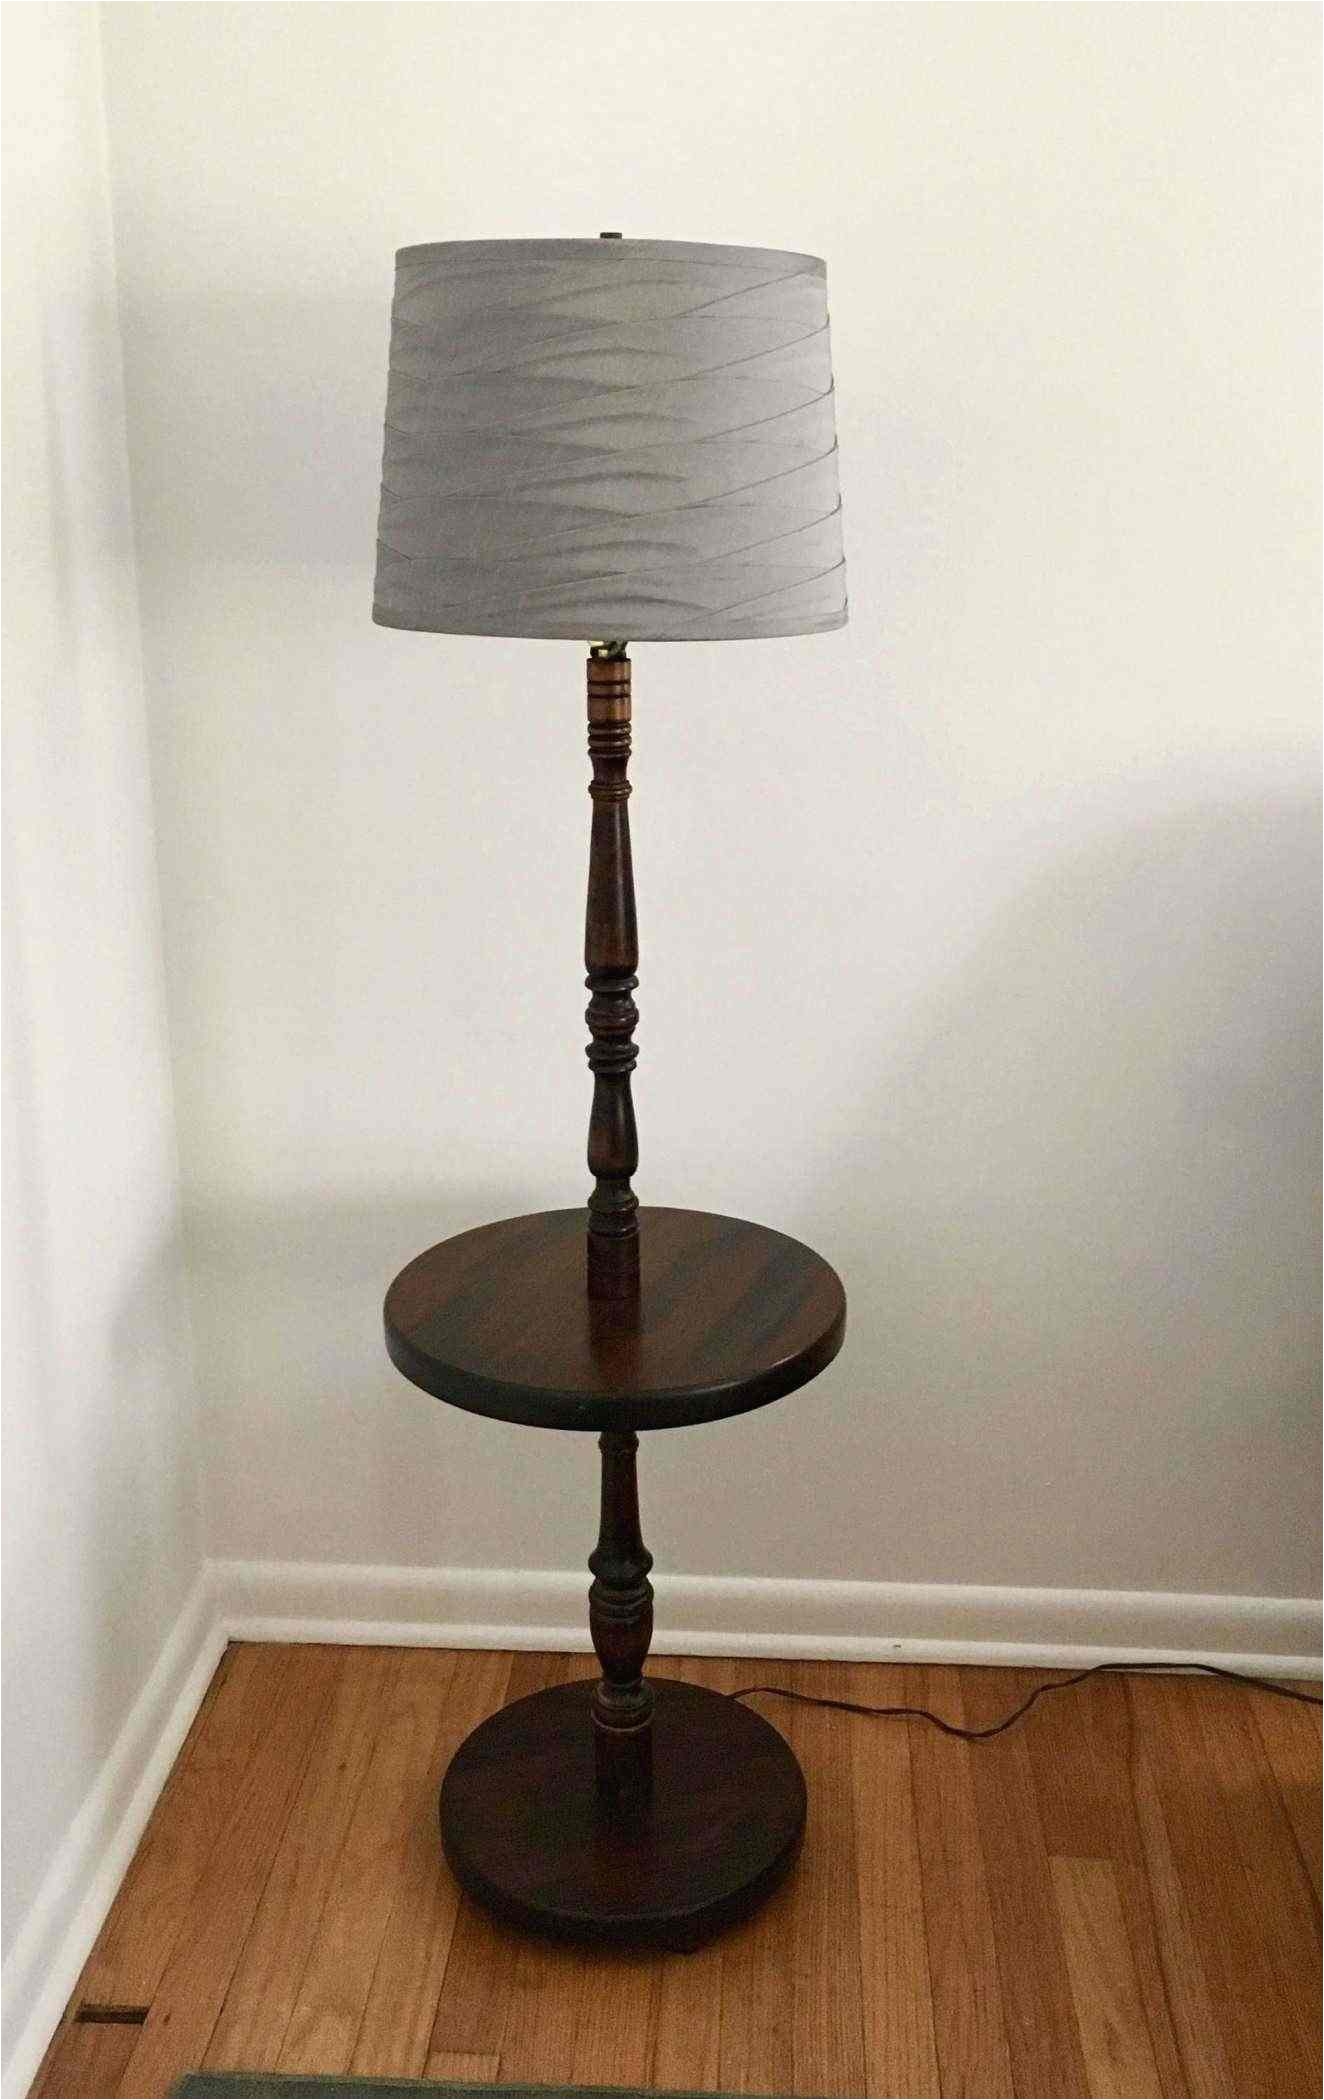 30 pictures big lots home decor new to decorating with floor lamps awesome safaxe patio furniture